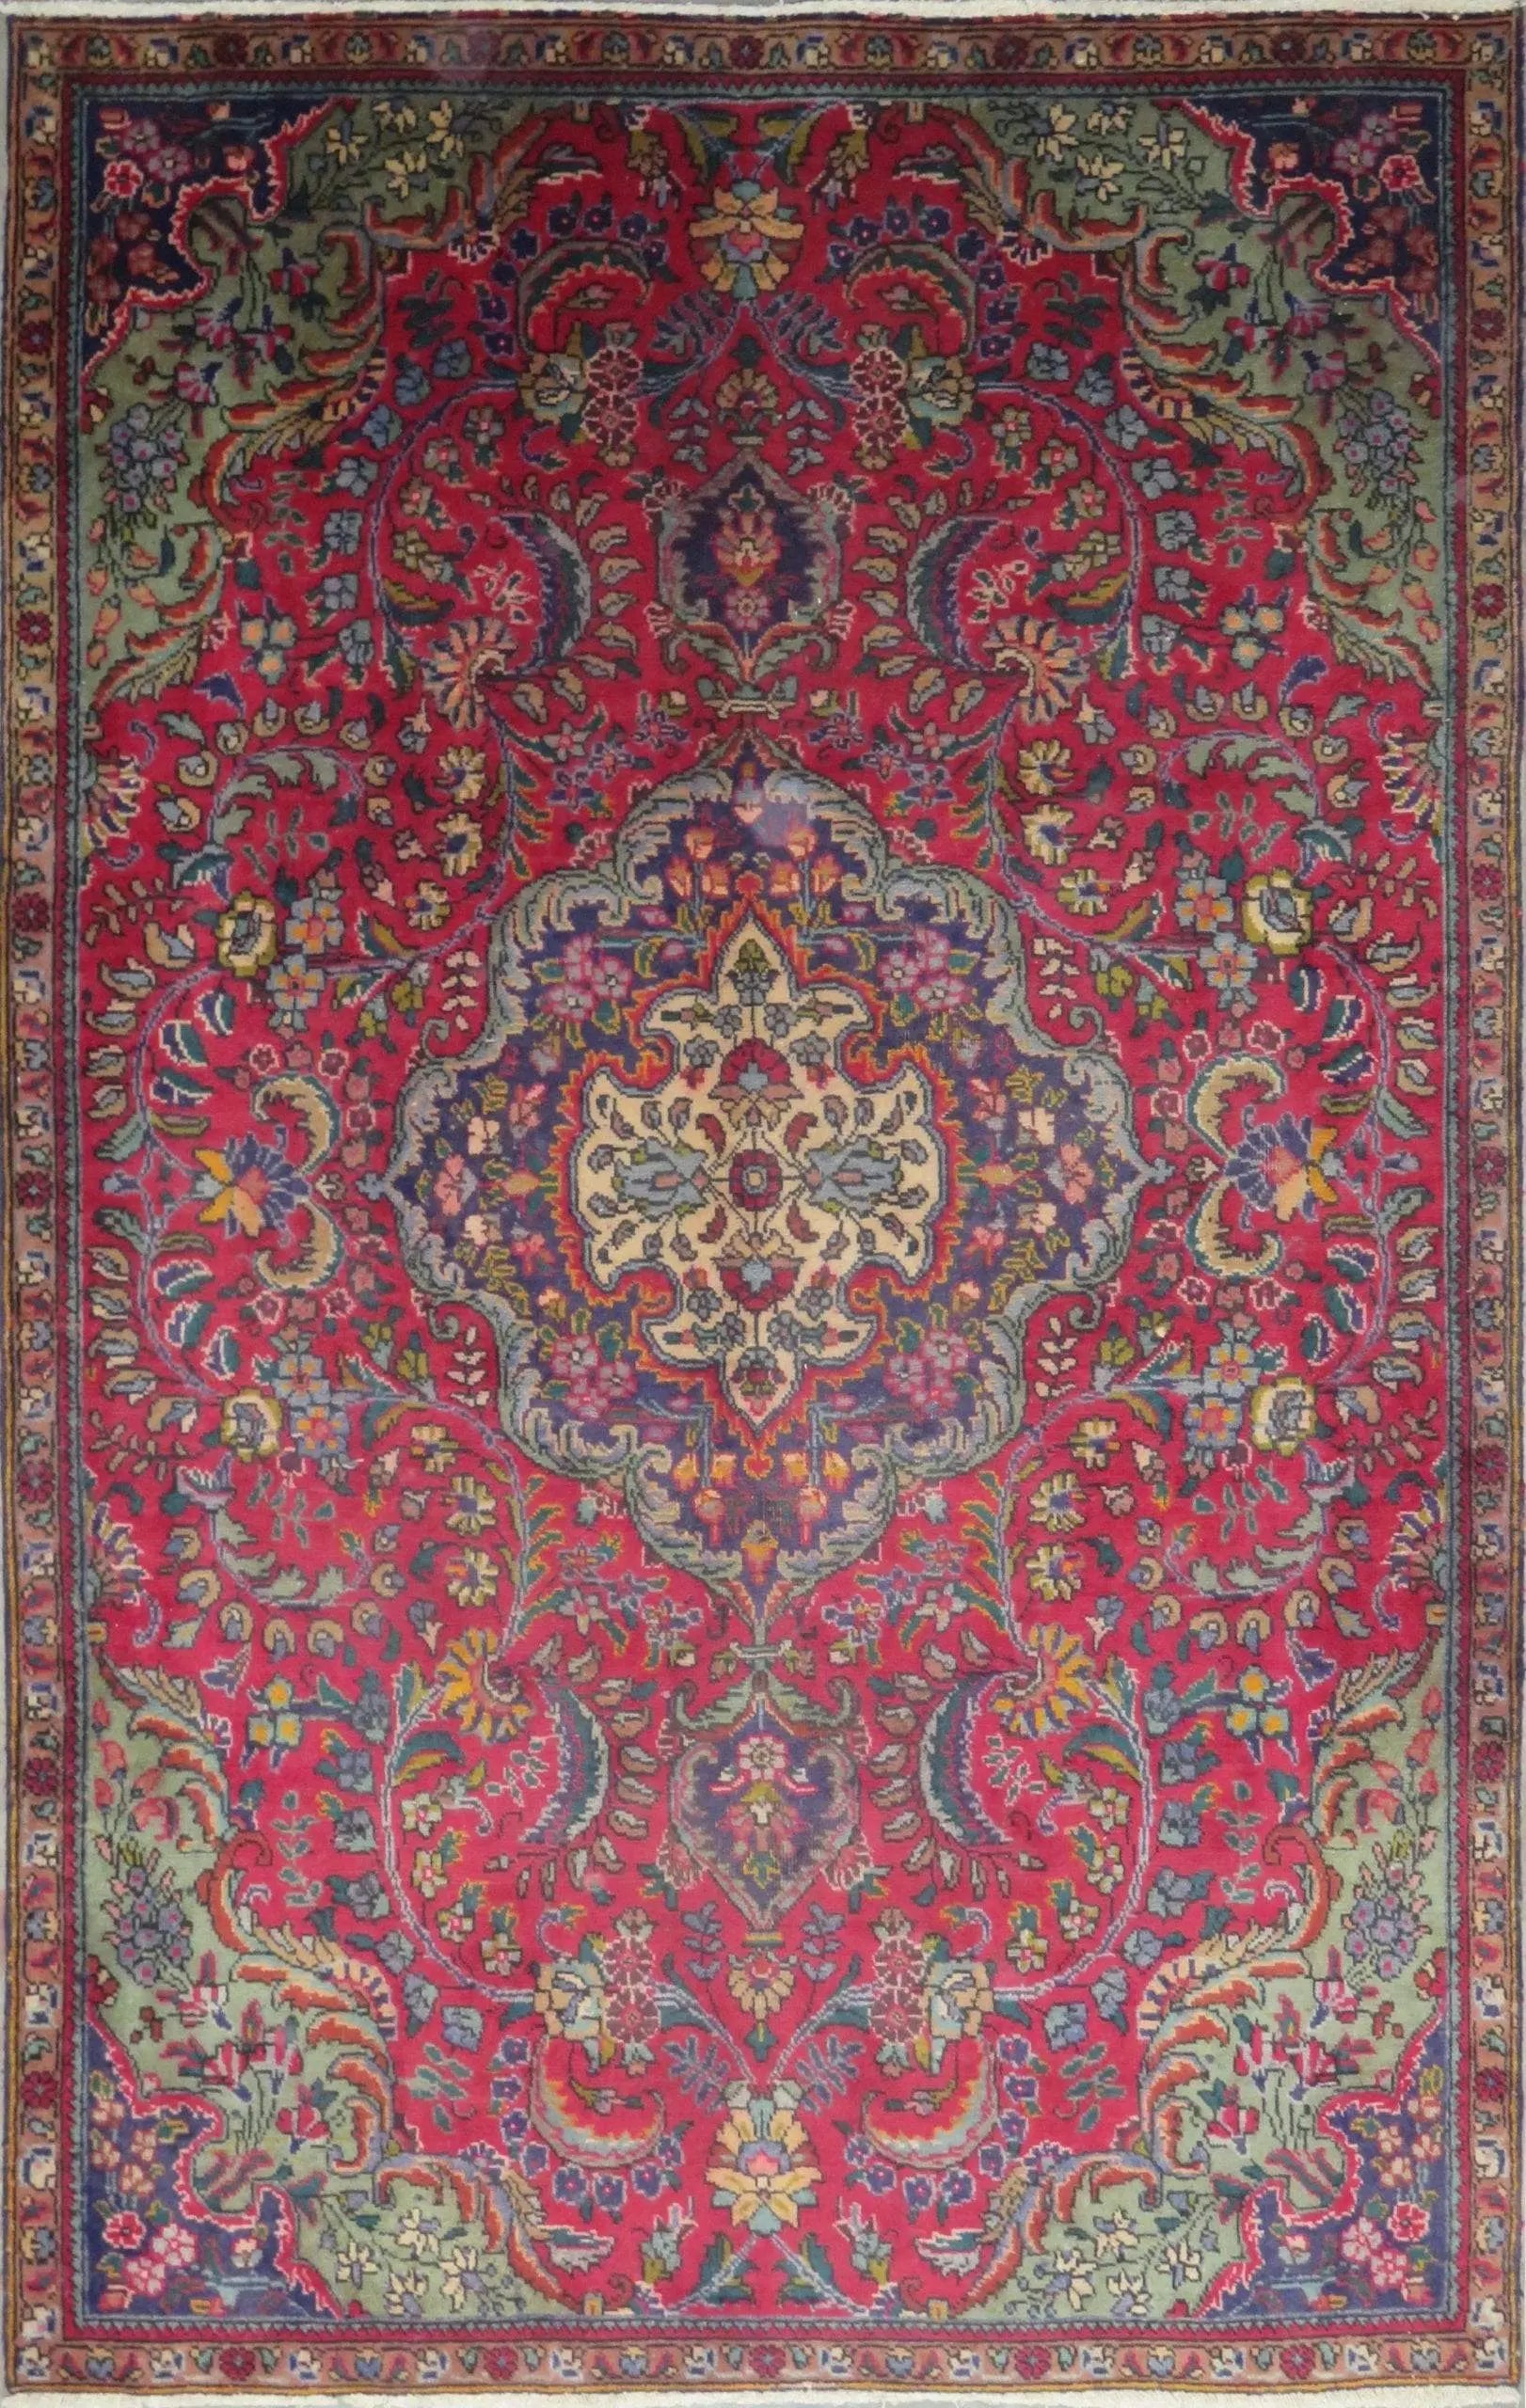 Hand-Knotted Persian Wool Rug _ Luxurious Vintage Design, 7'9" x 5'1", Artisan Crafted